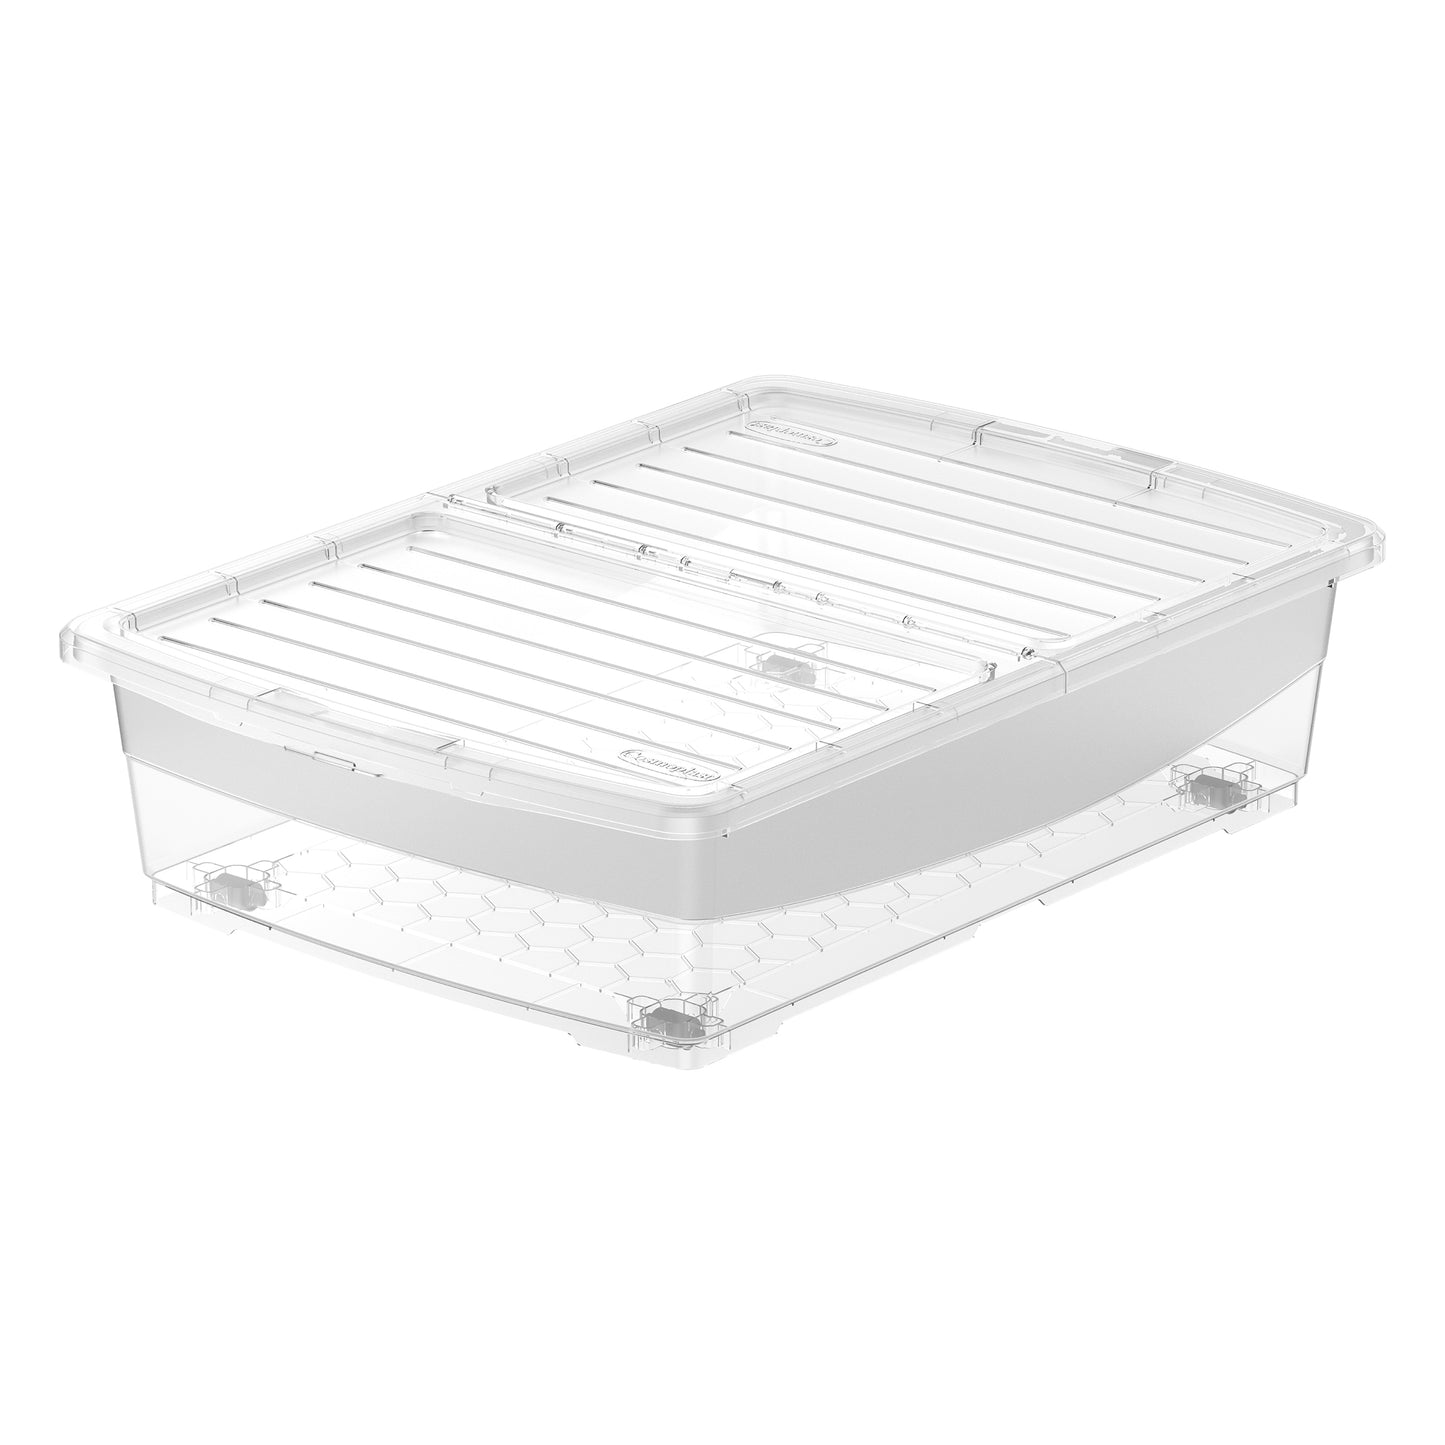 45L Clear Plastic Underbed Storage Box with Wheels & Lockable Lid